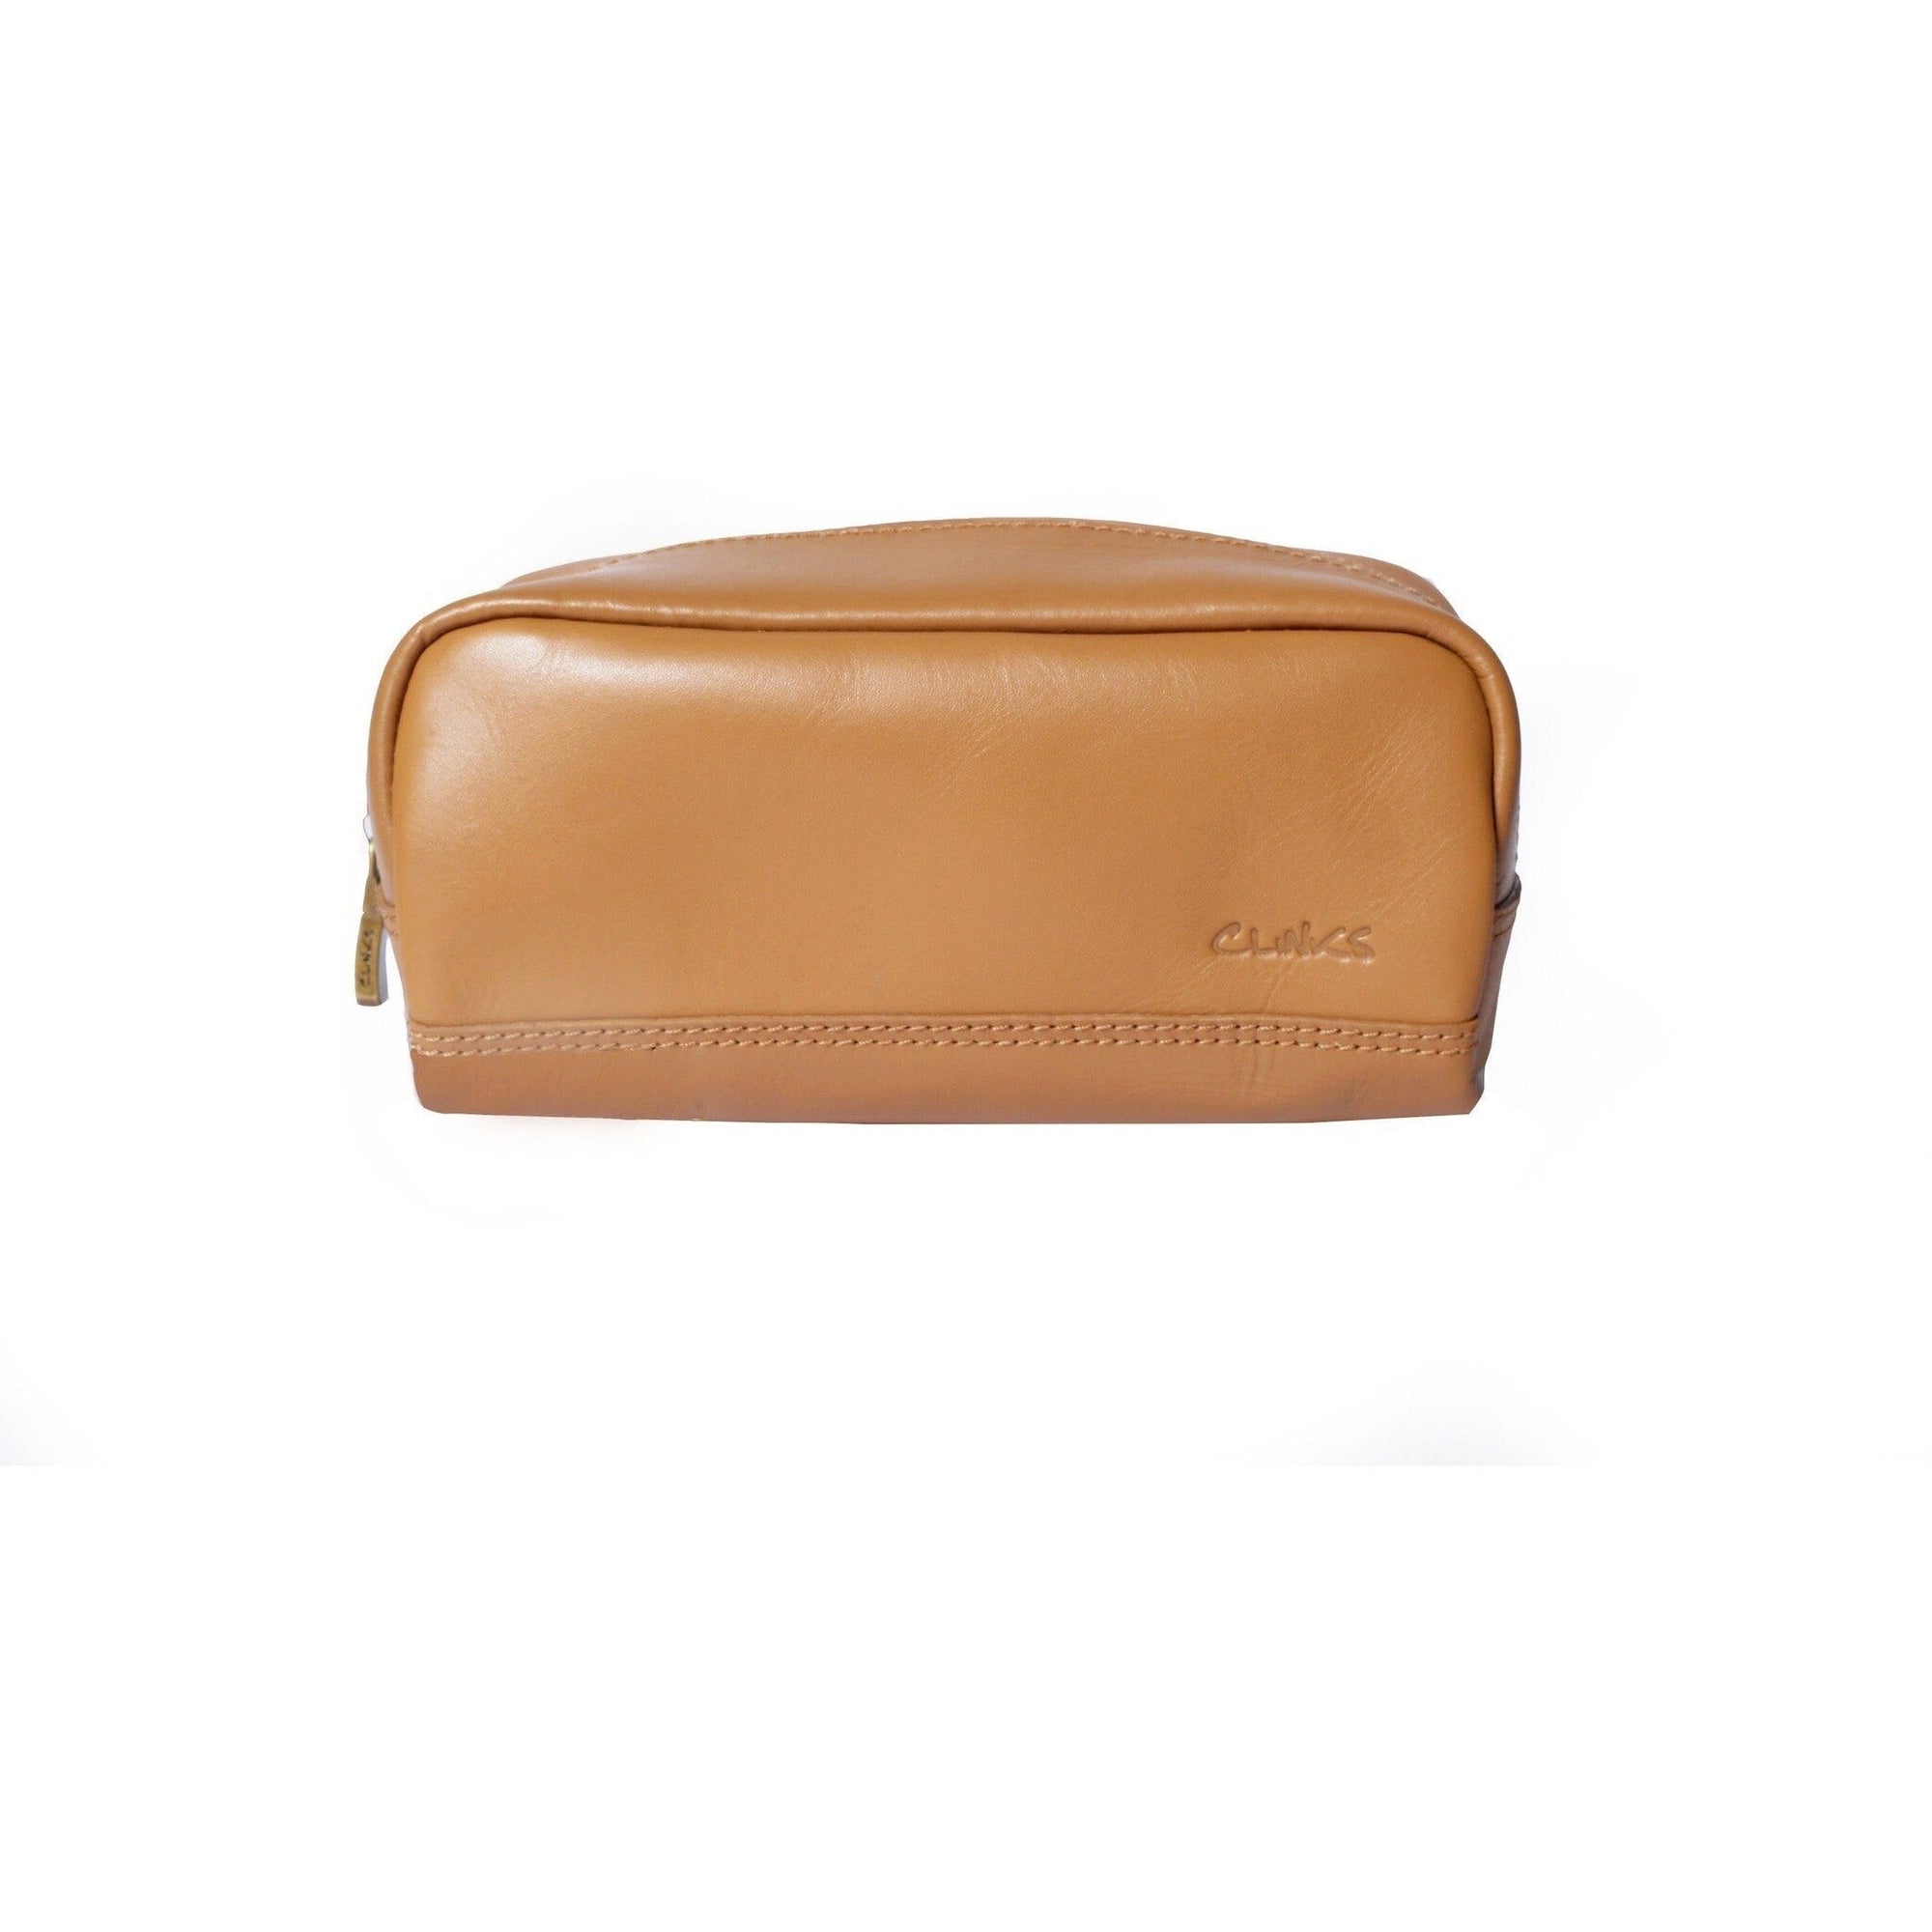 Small Leather Toiletry Bag in Tan Leather Accessories Clinks Australia Small Leather Toiletry Bag in Tan 